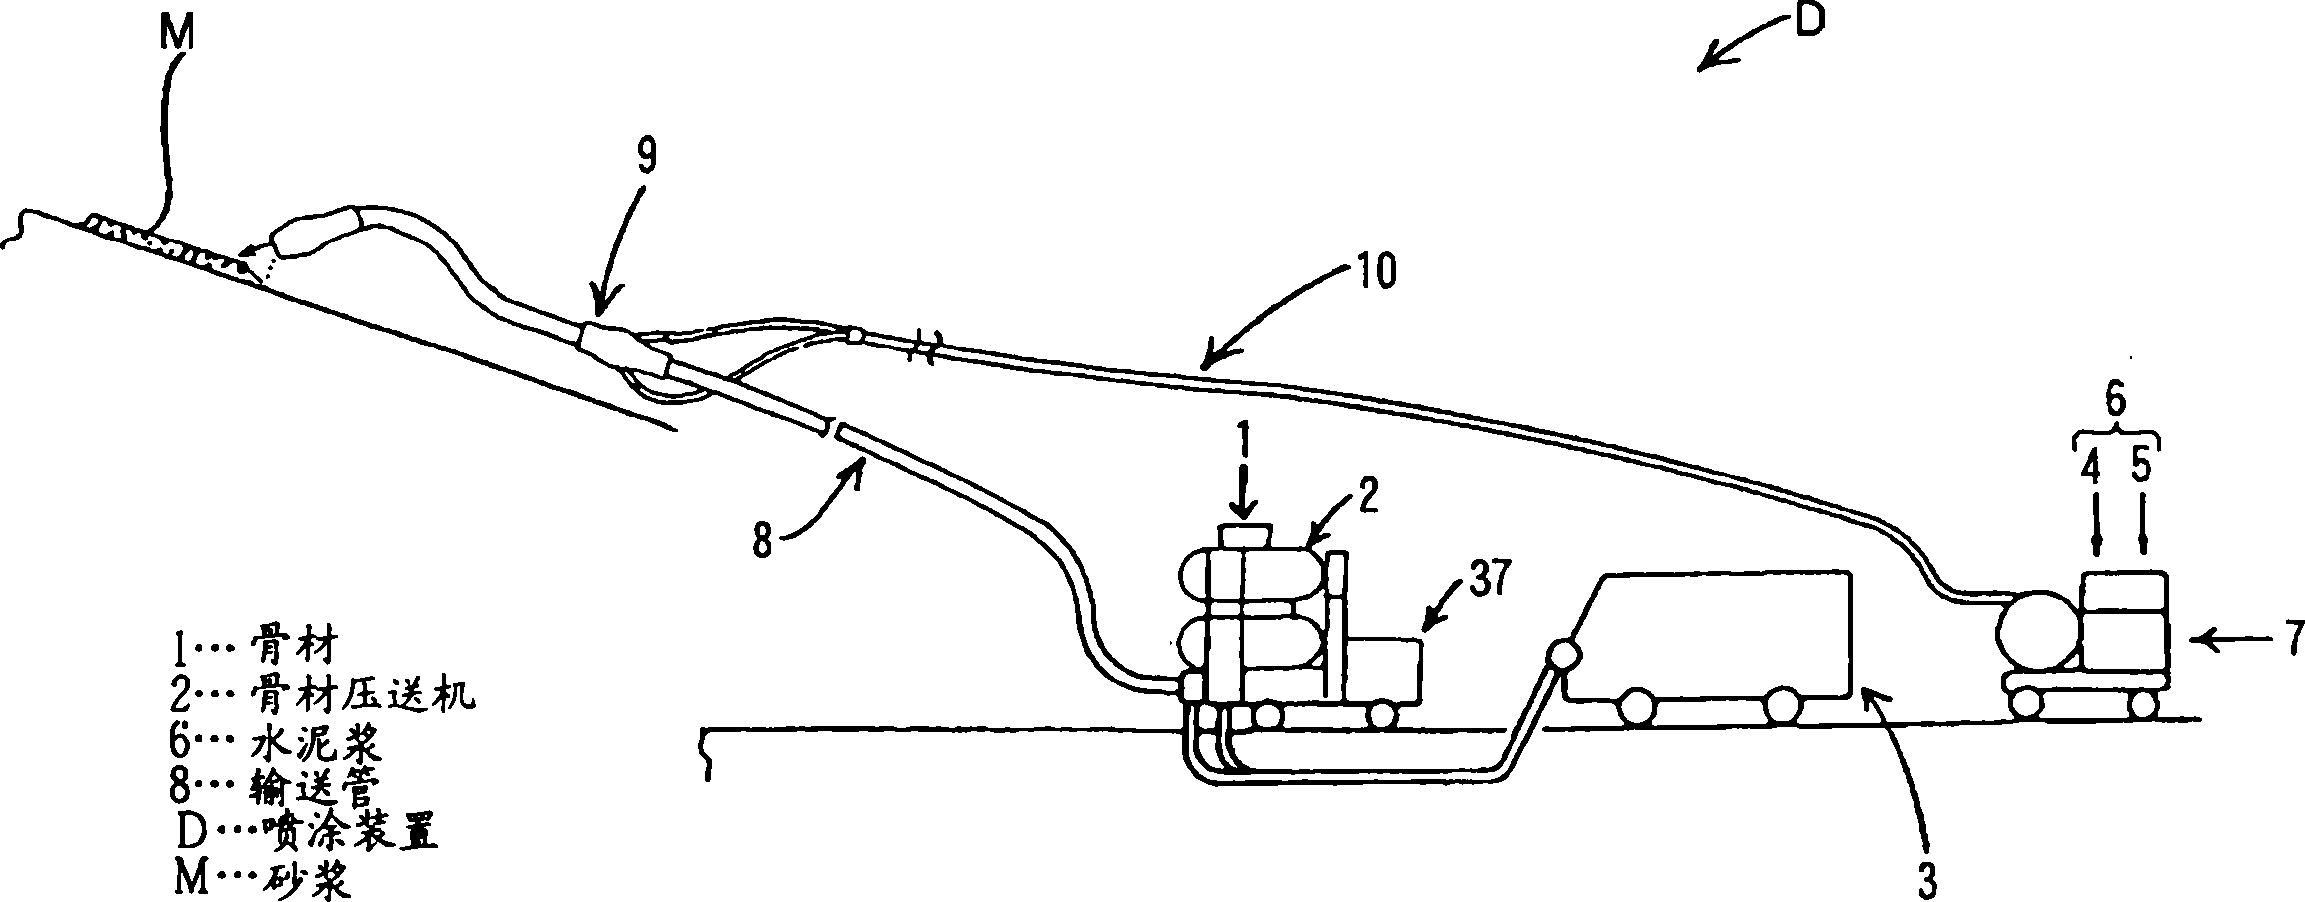 Device for spraying mortar or concrete, and method of spraying mortar or concrete by using the device